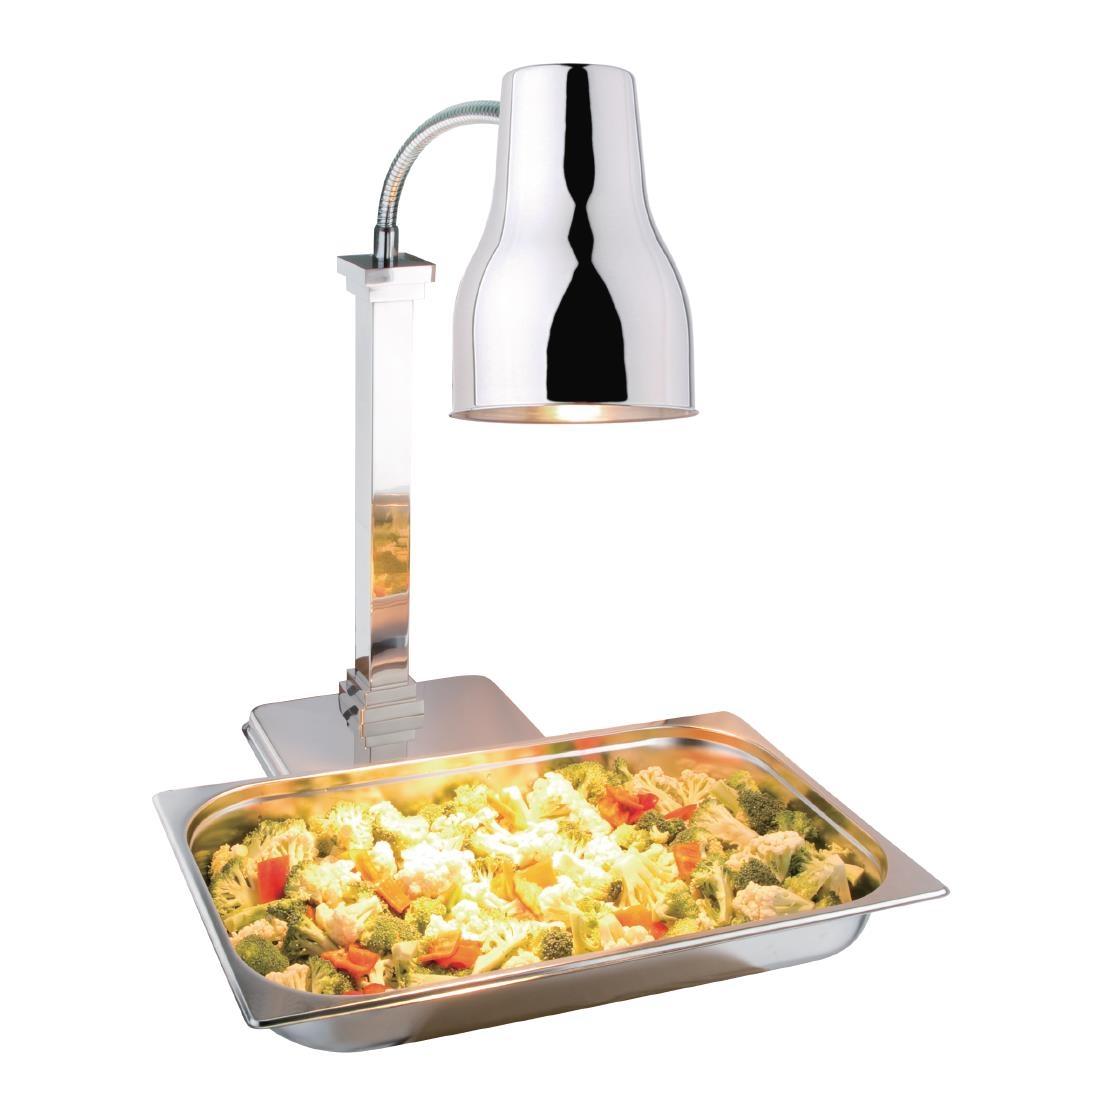 Olympia Carving Station Heat Lamp - CN316  - 2